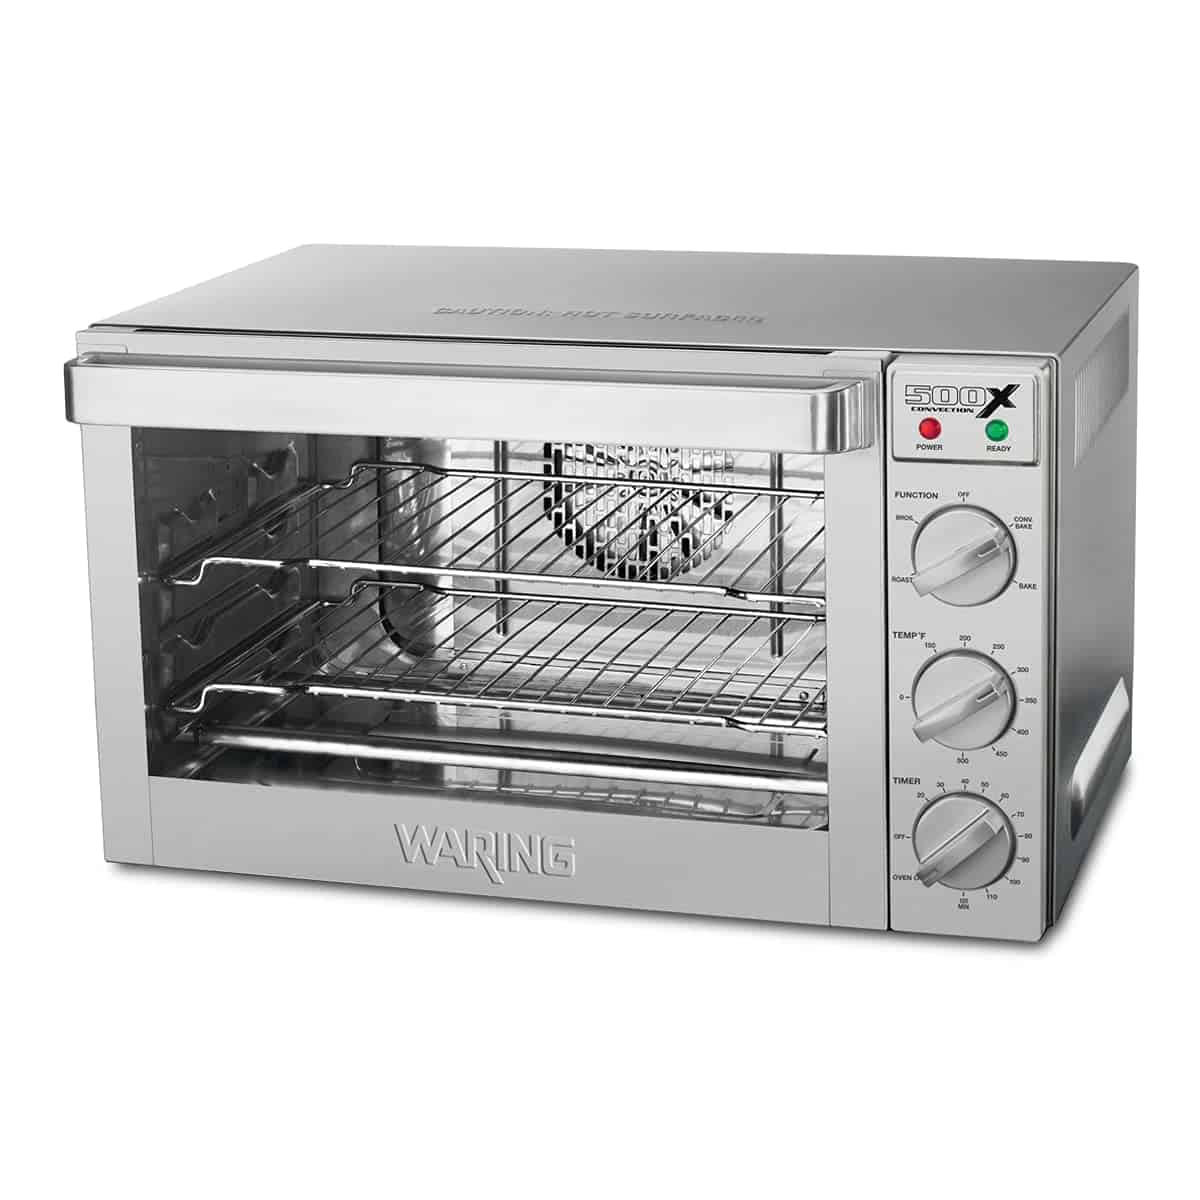 https://static.thedaringkitchen.com/wp-content/uploads/2022/05/small-convection-oven.jpg